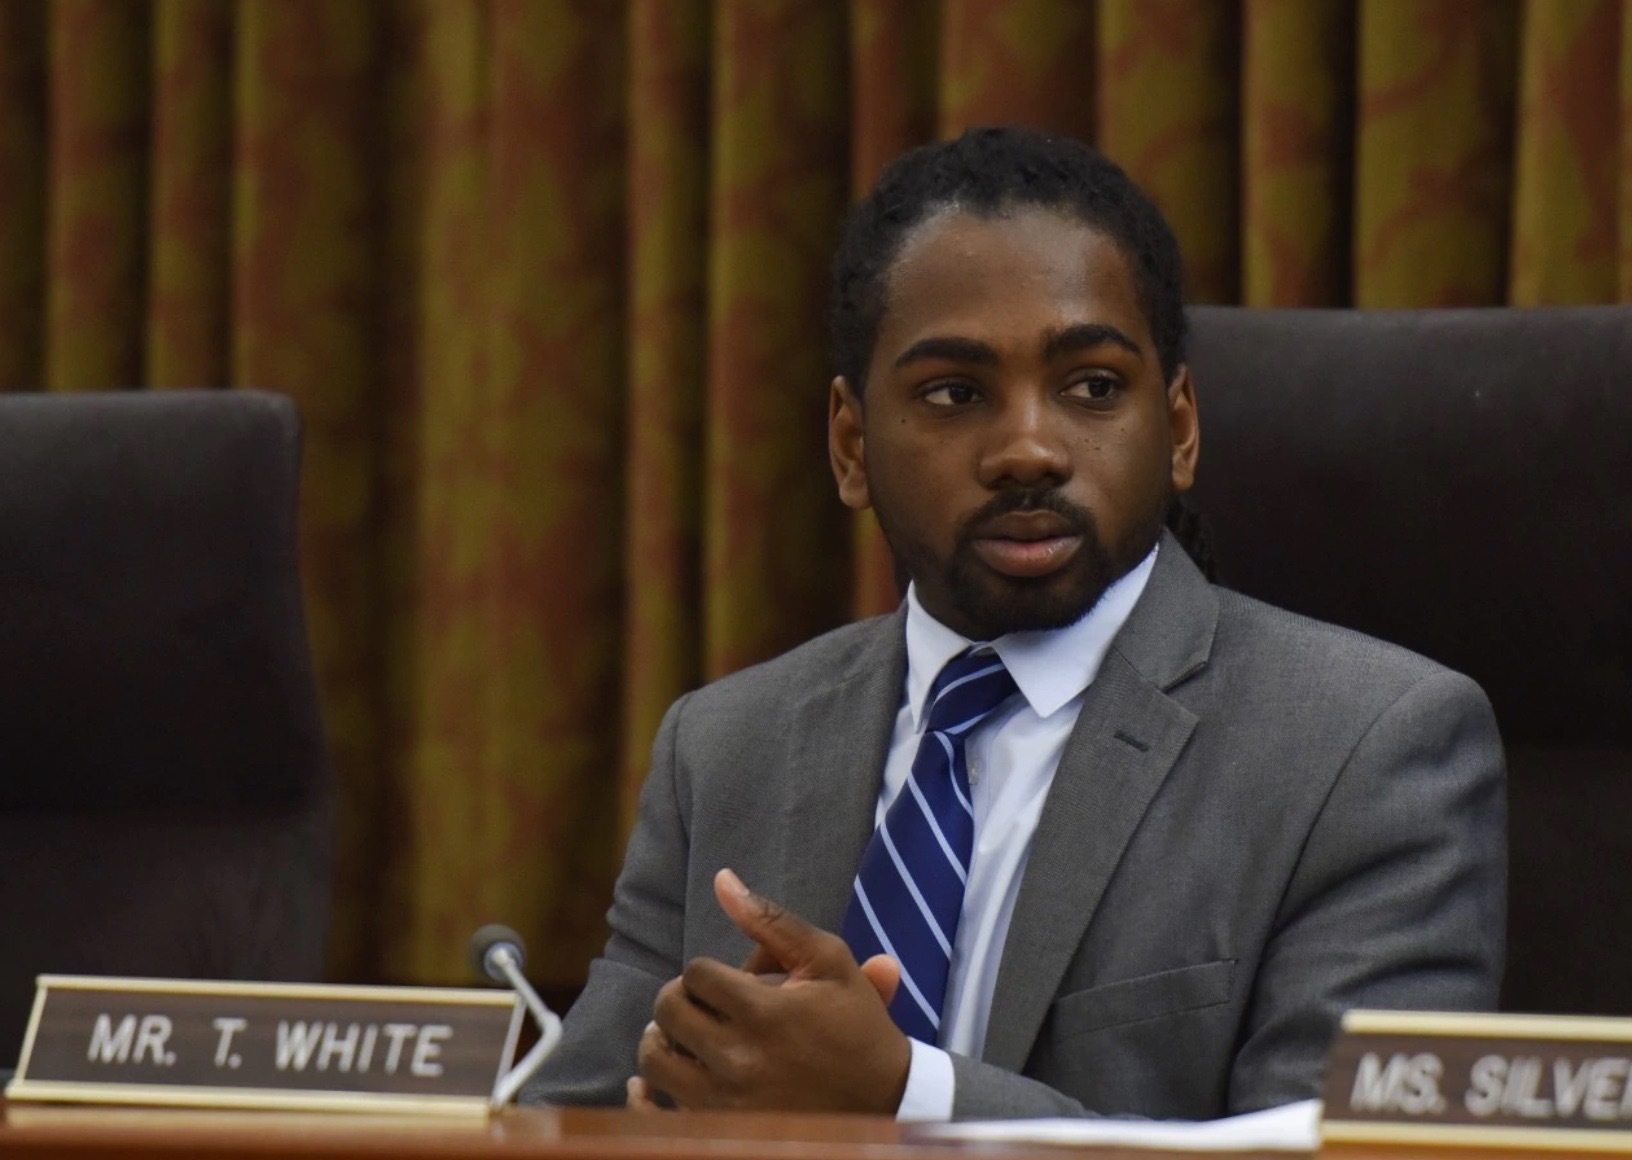 No Reprimand For D.C. Lawmaker Who Donated to Nation of Islam Event Where Jews Were Denounced